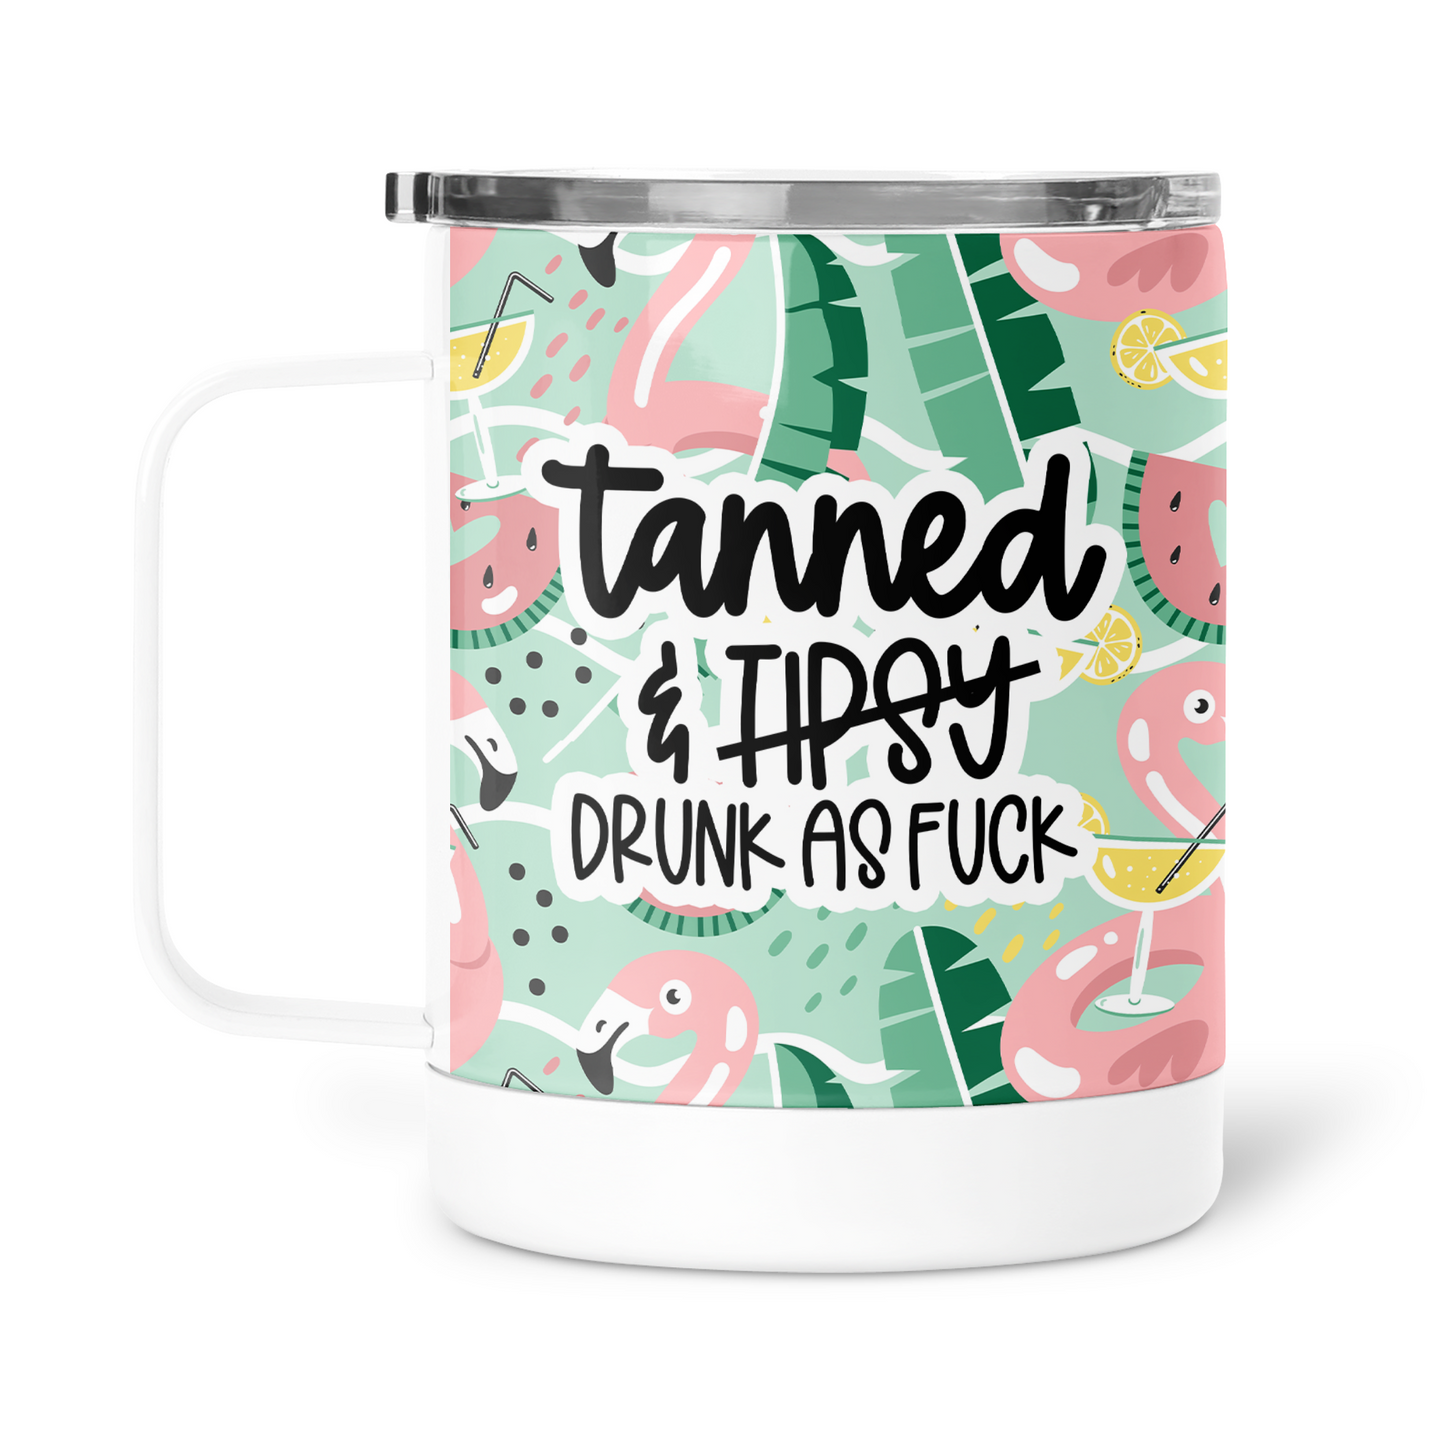 Tanned and Drunk As Fuck Mug With Lid